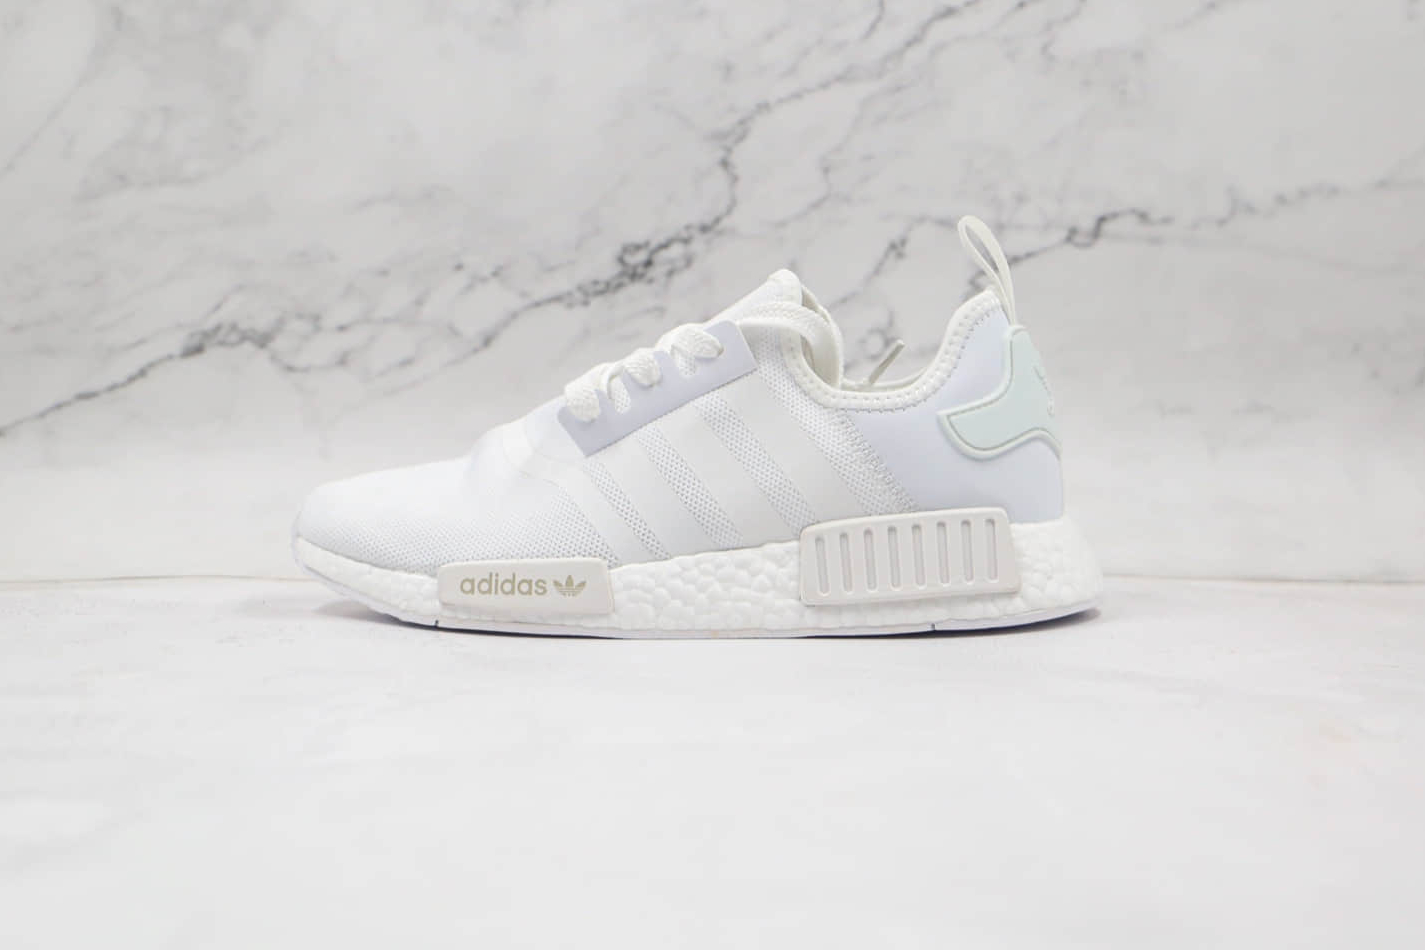 Adidas Originals NMD_R1 'White Reflective' S31506 - Stylish and Reflective Footwear